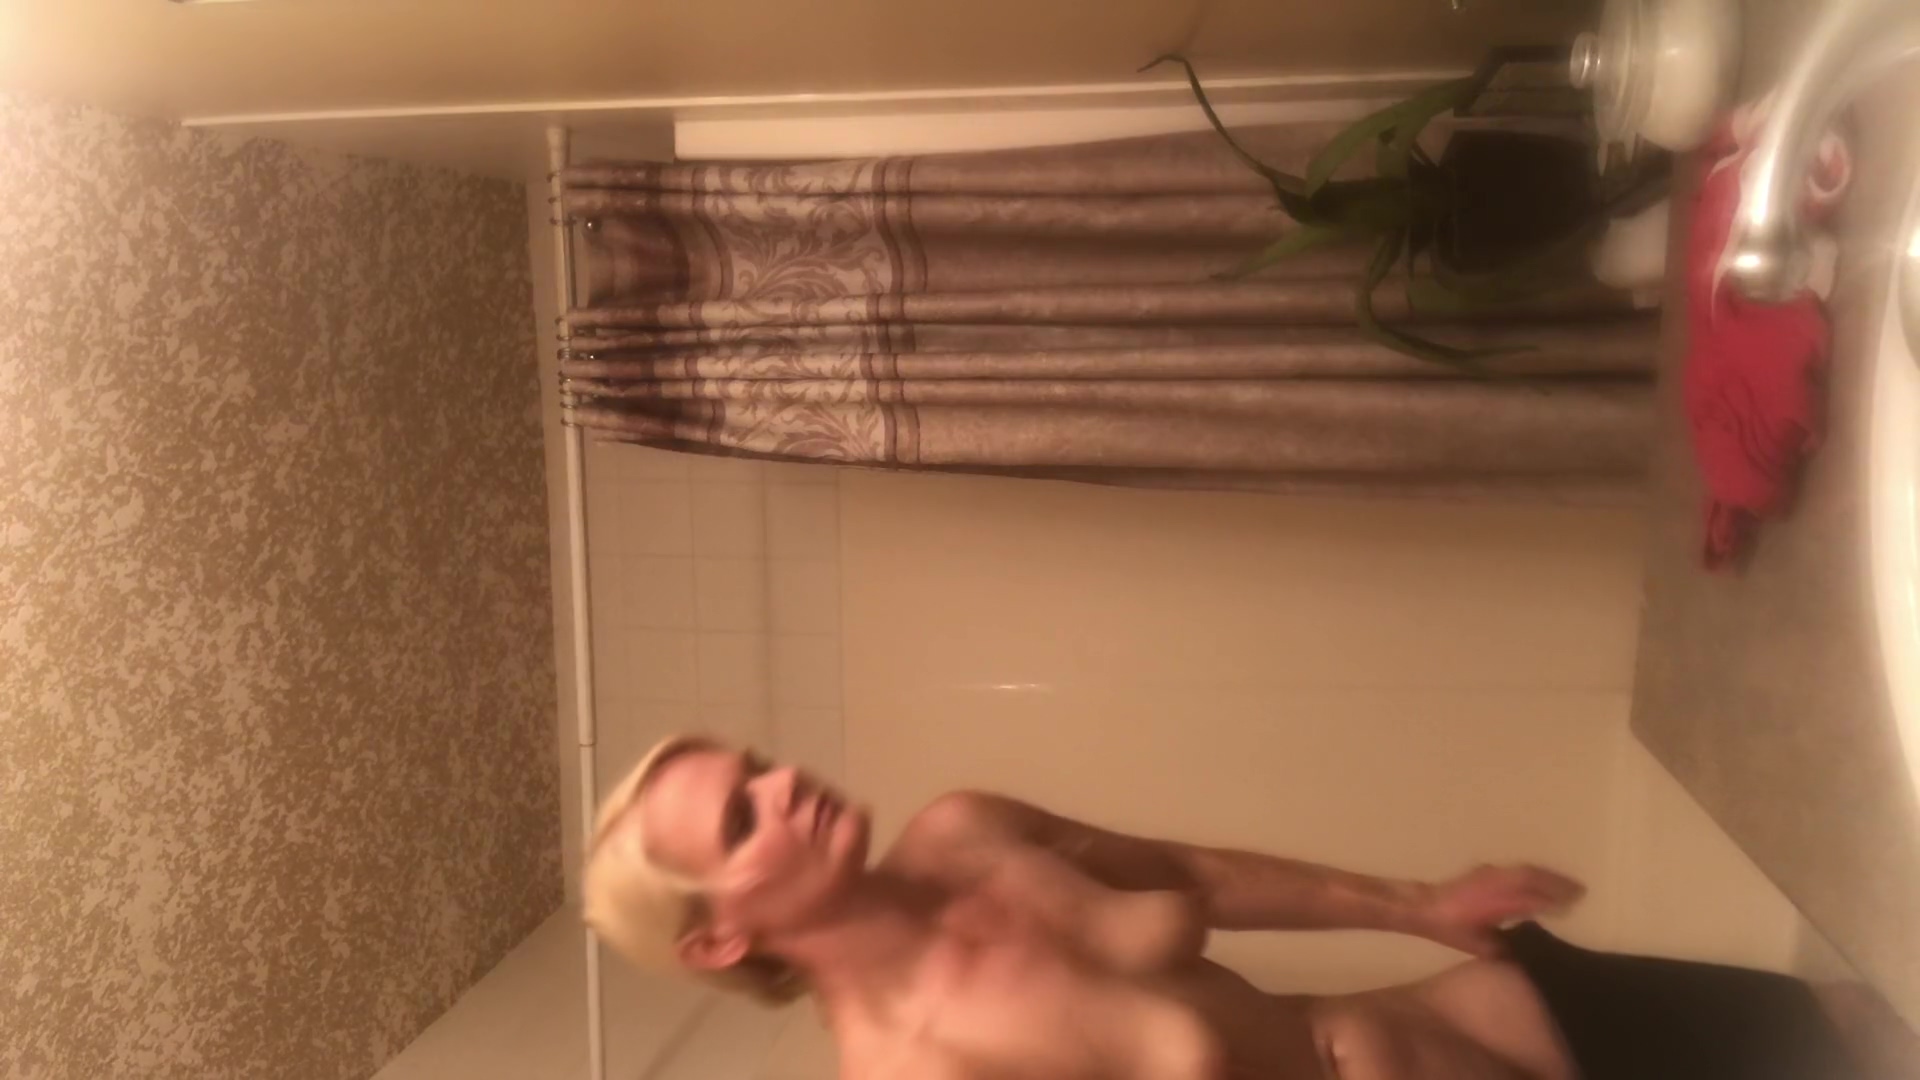 Tight Body Milf Spy Cam On Step Mom Naked After Shower! More Coming I Hope!  picture pic